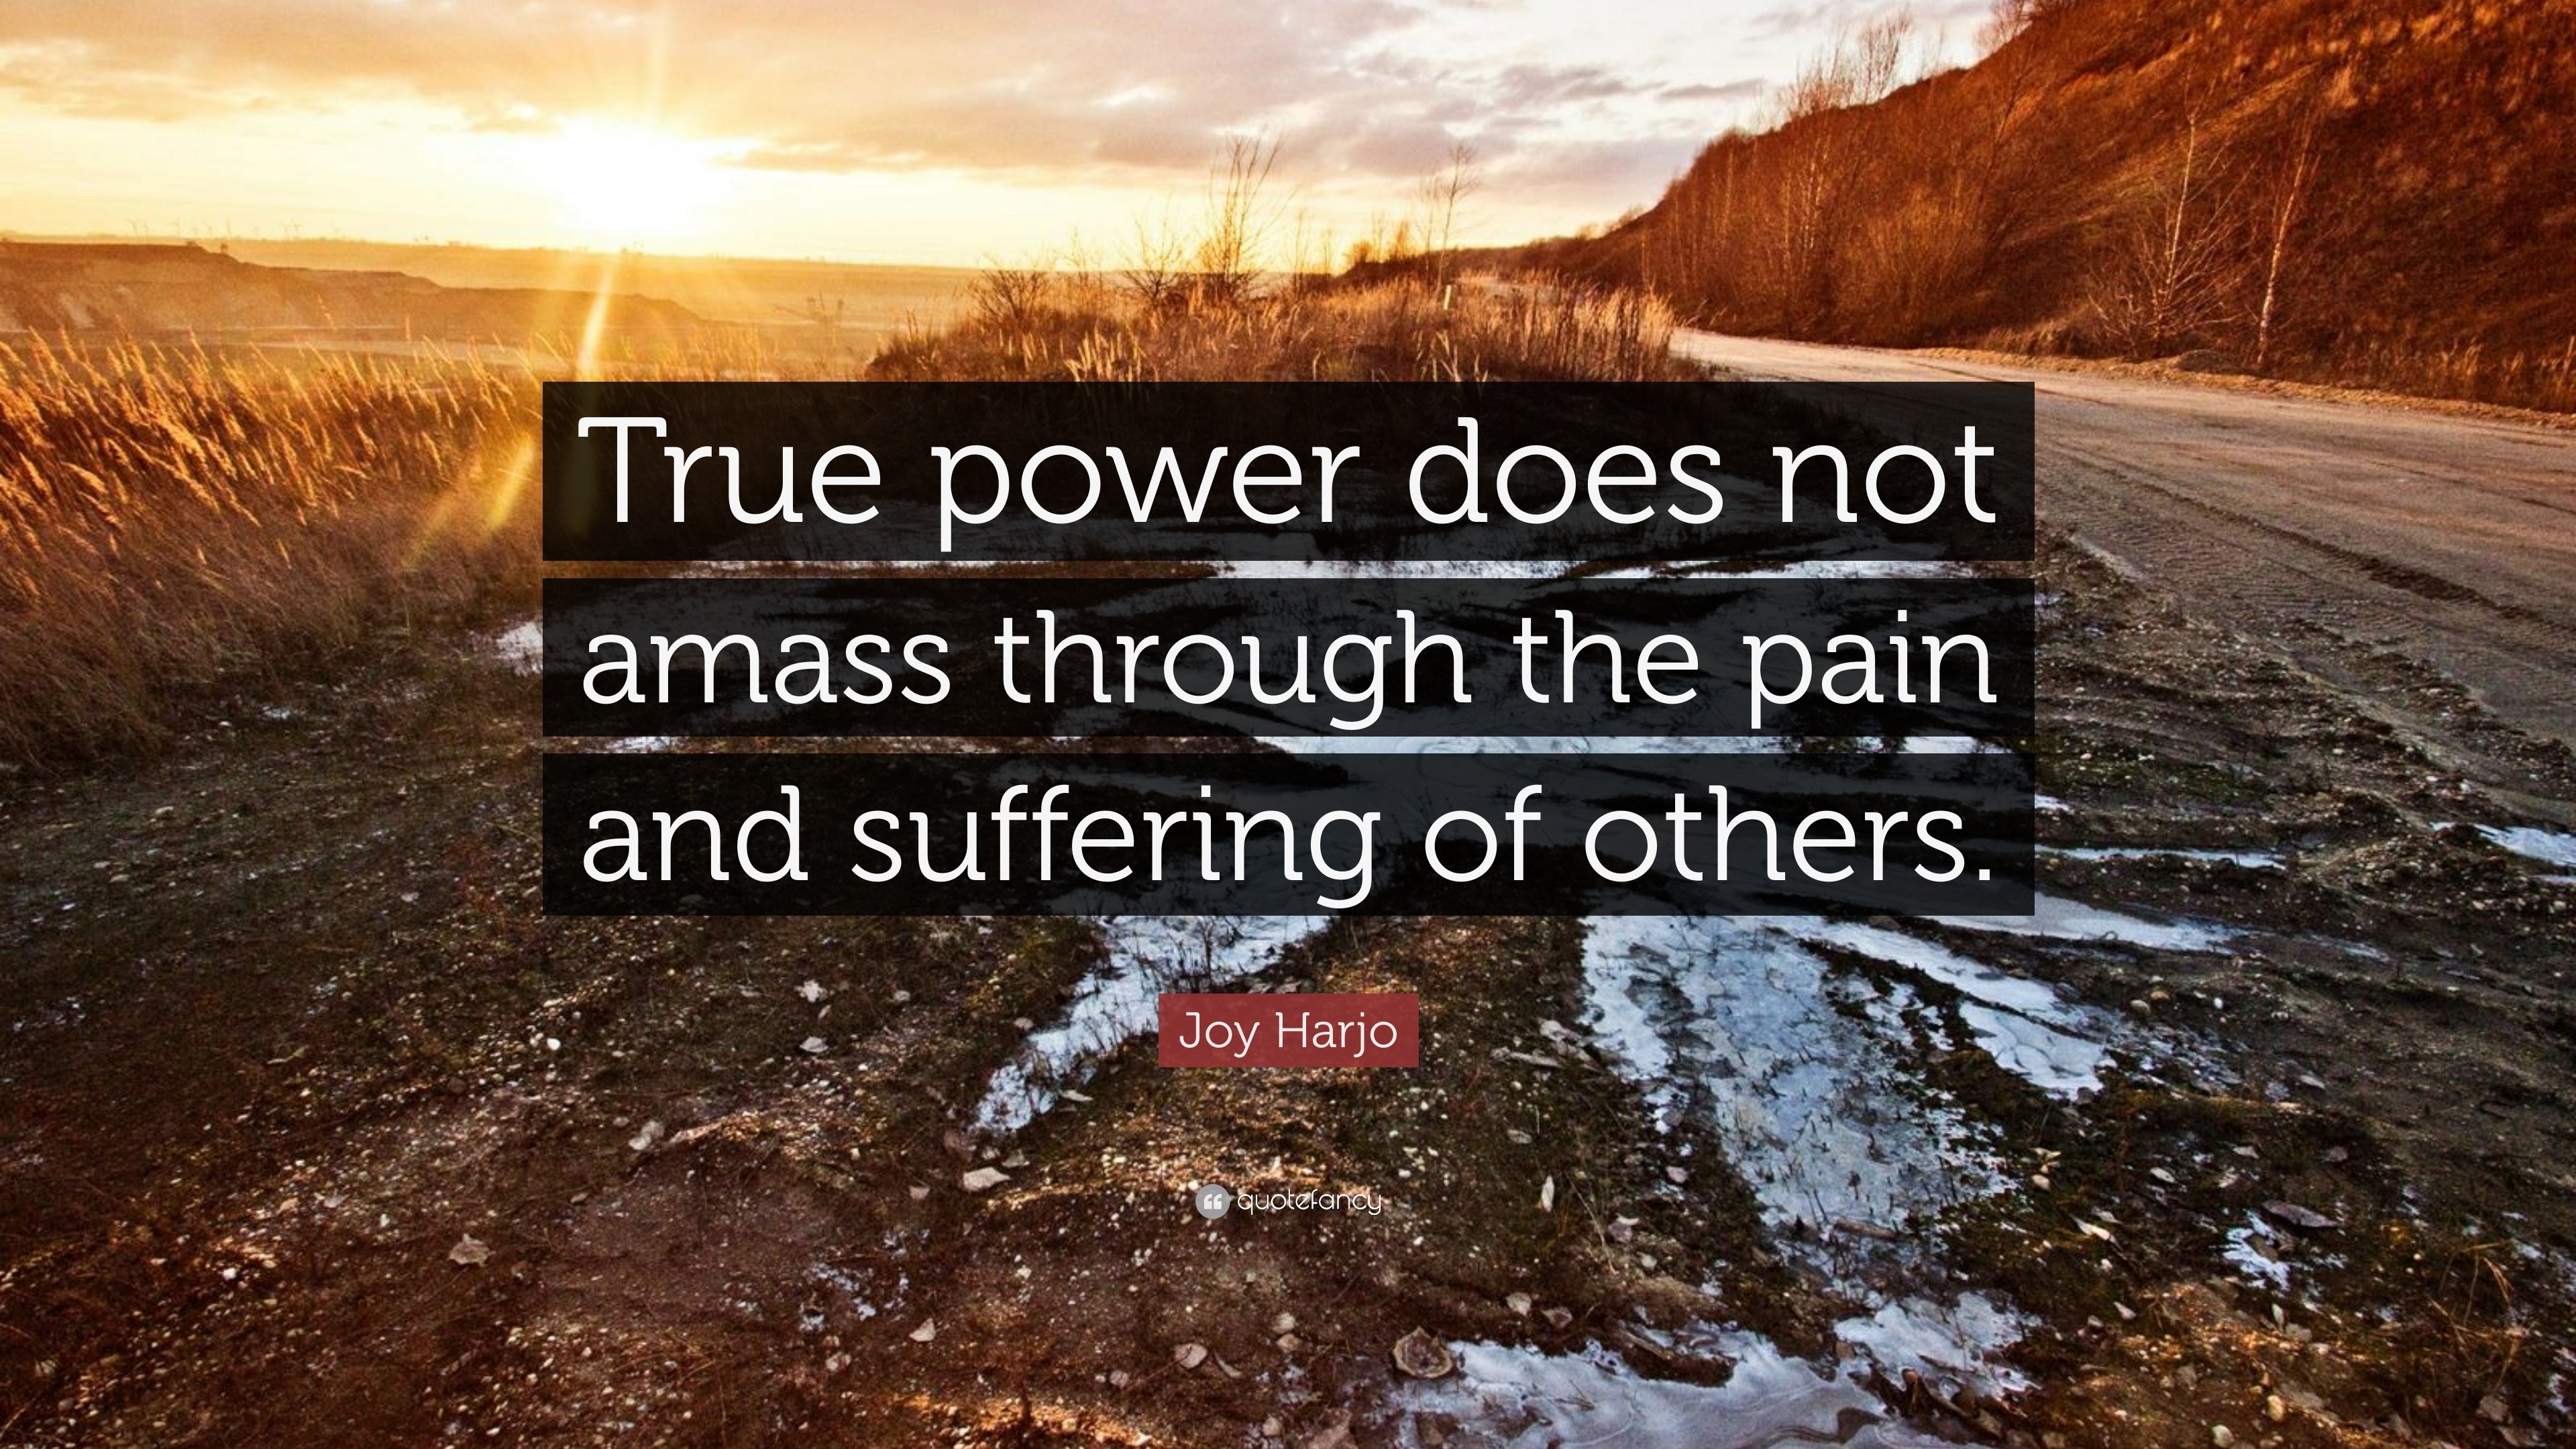 Joy Harjo Quote: “True power does not amass through the pain and ...